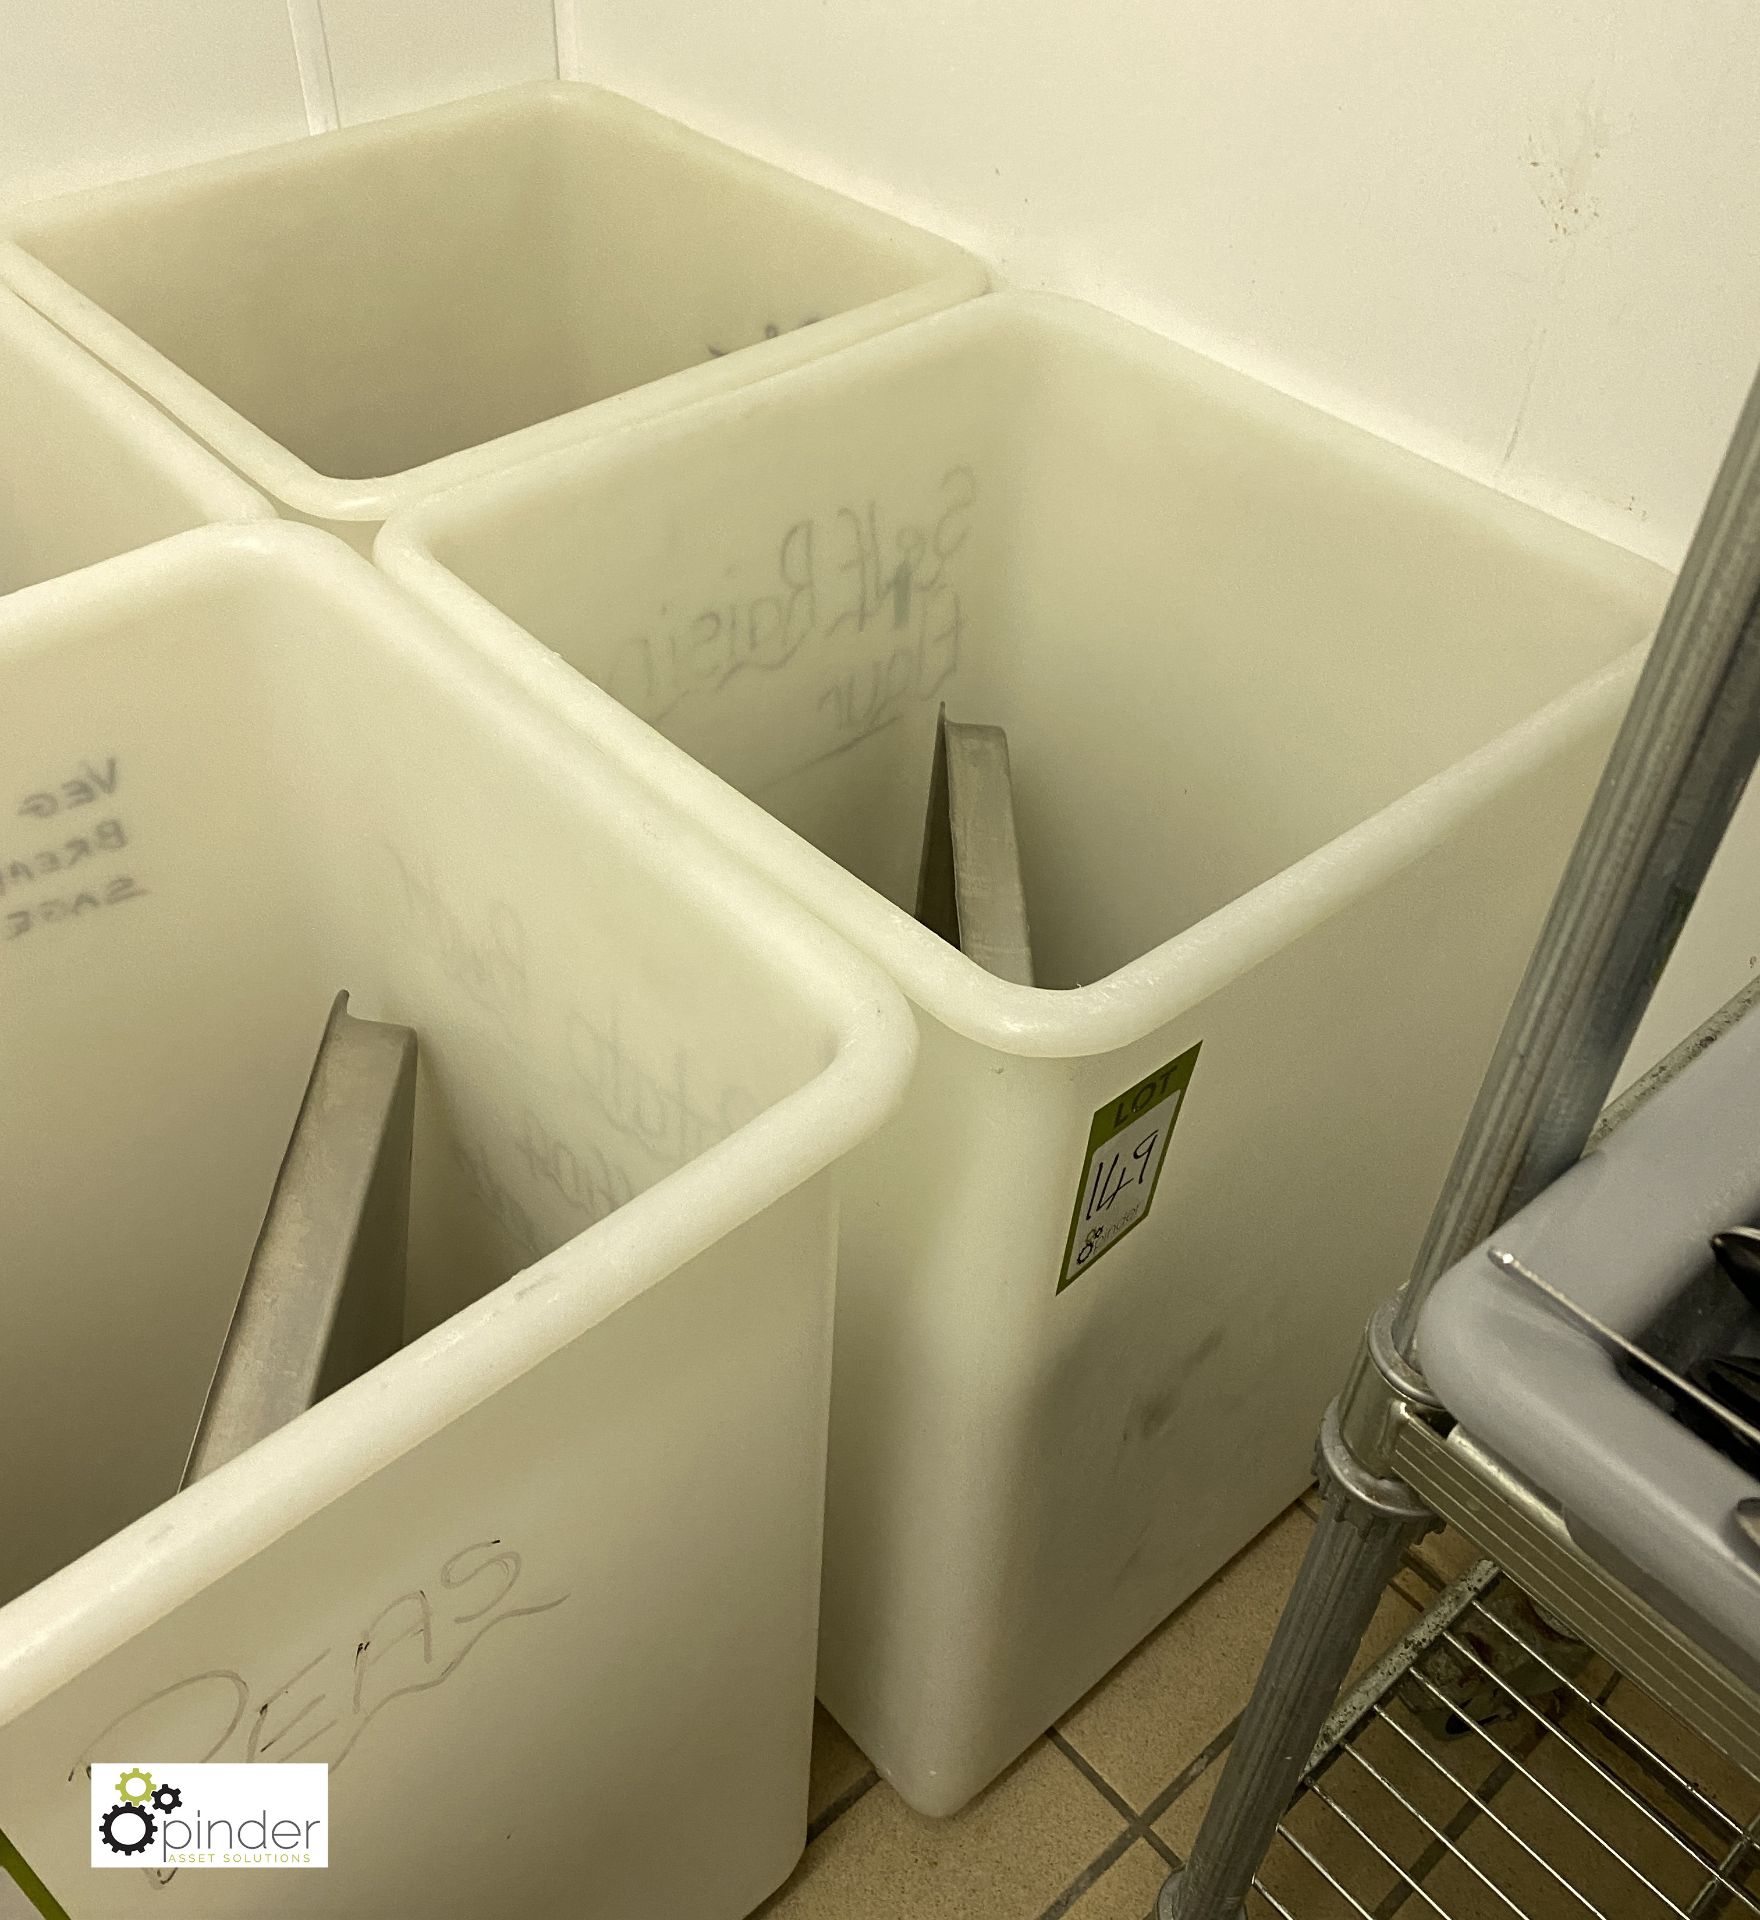 2 mobile Ingredient Bins, with lids